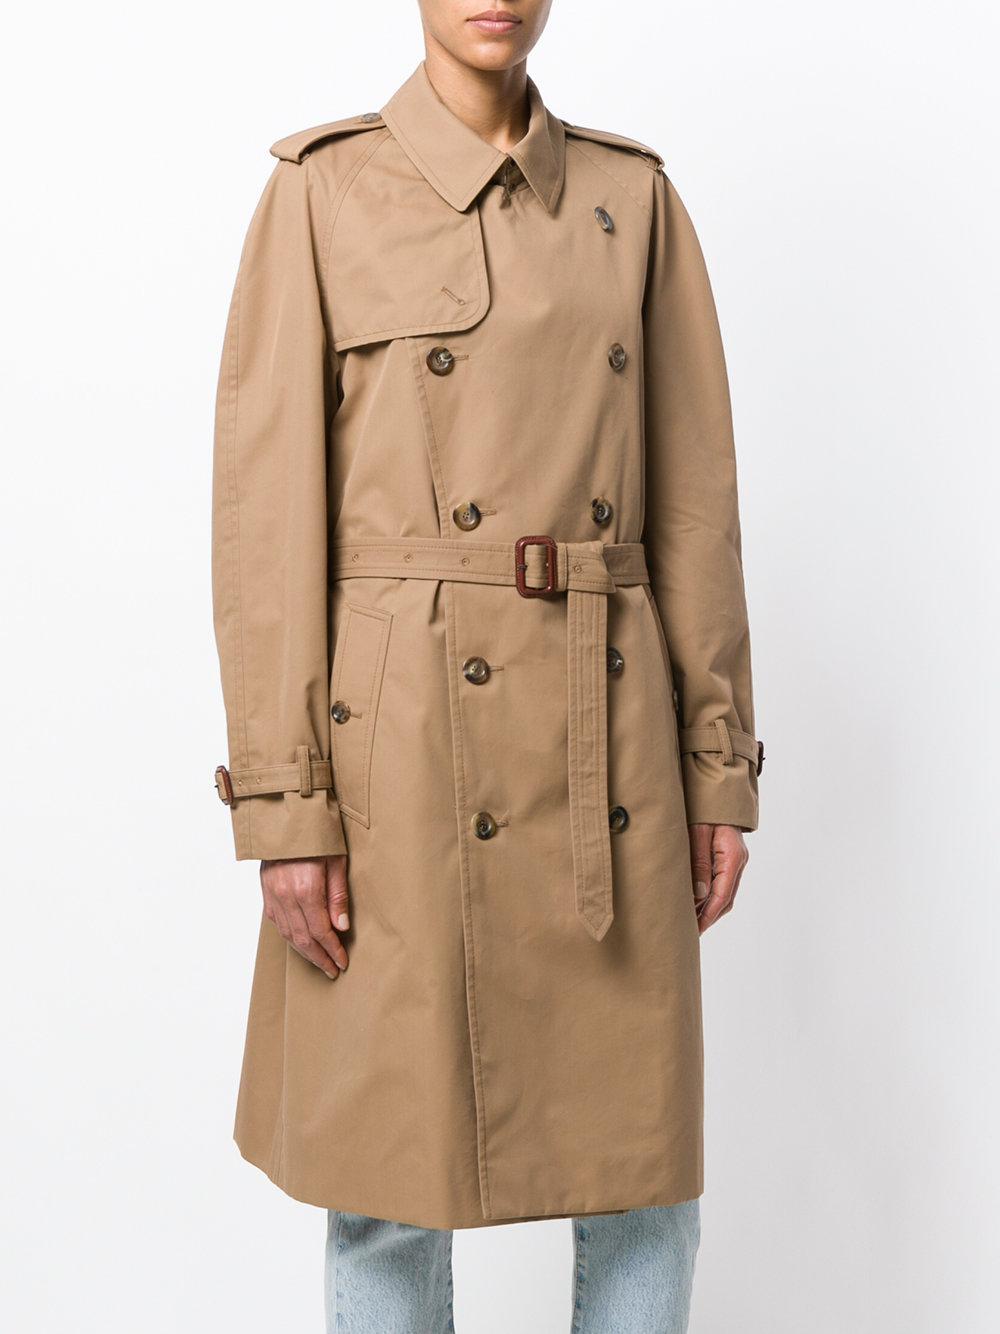 Gucci Cotton Cat-embroidered Trench Coat in Natural - Lyst